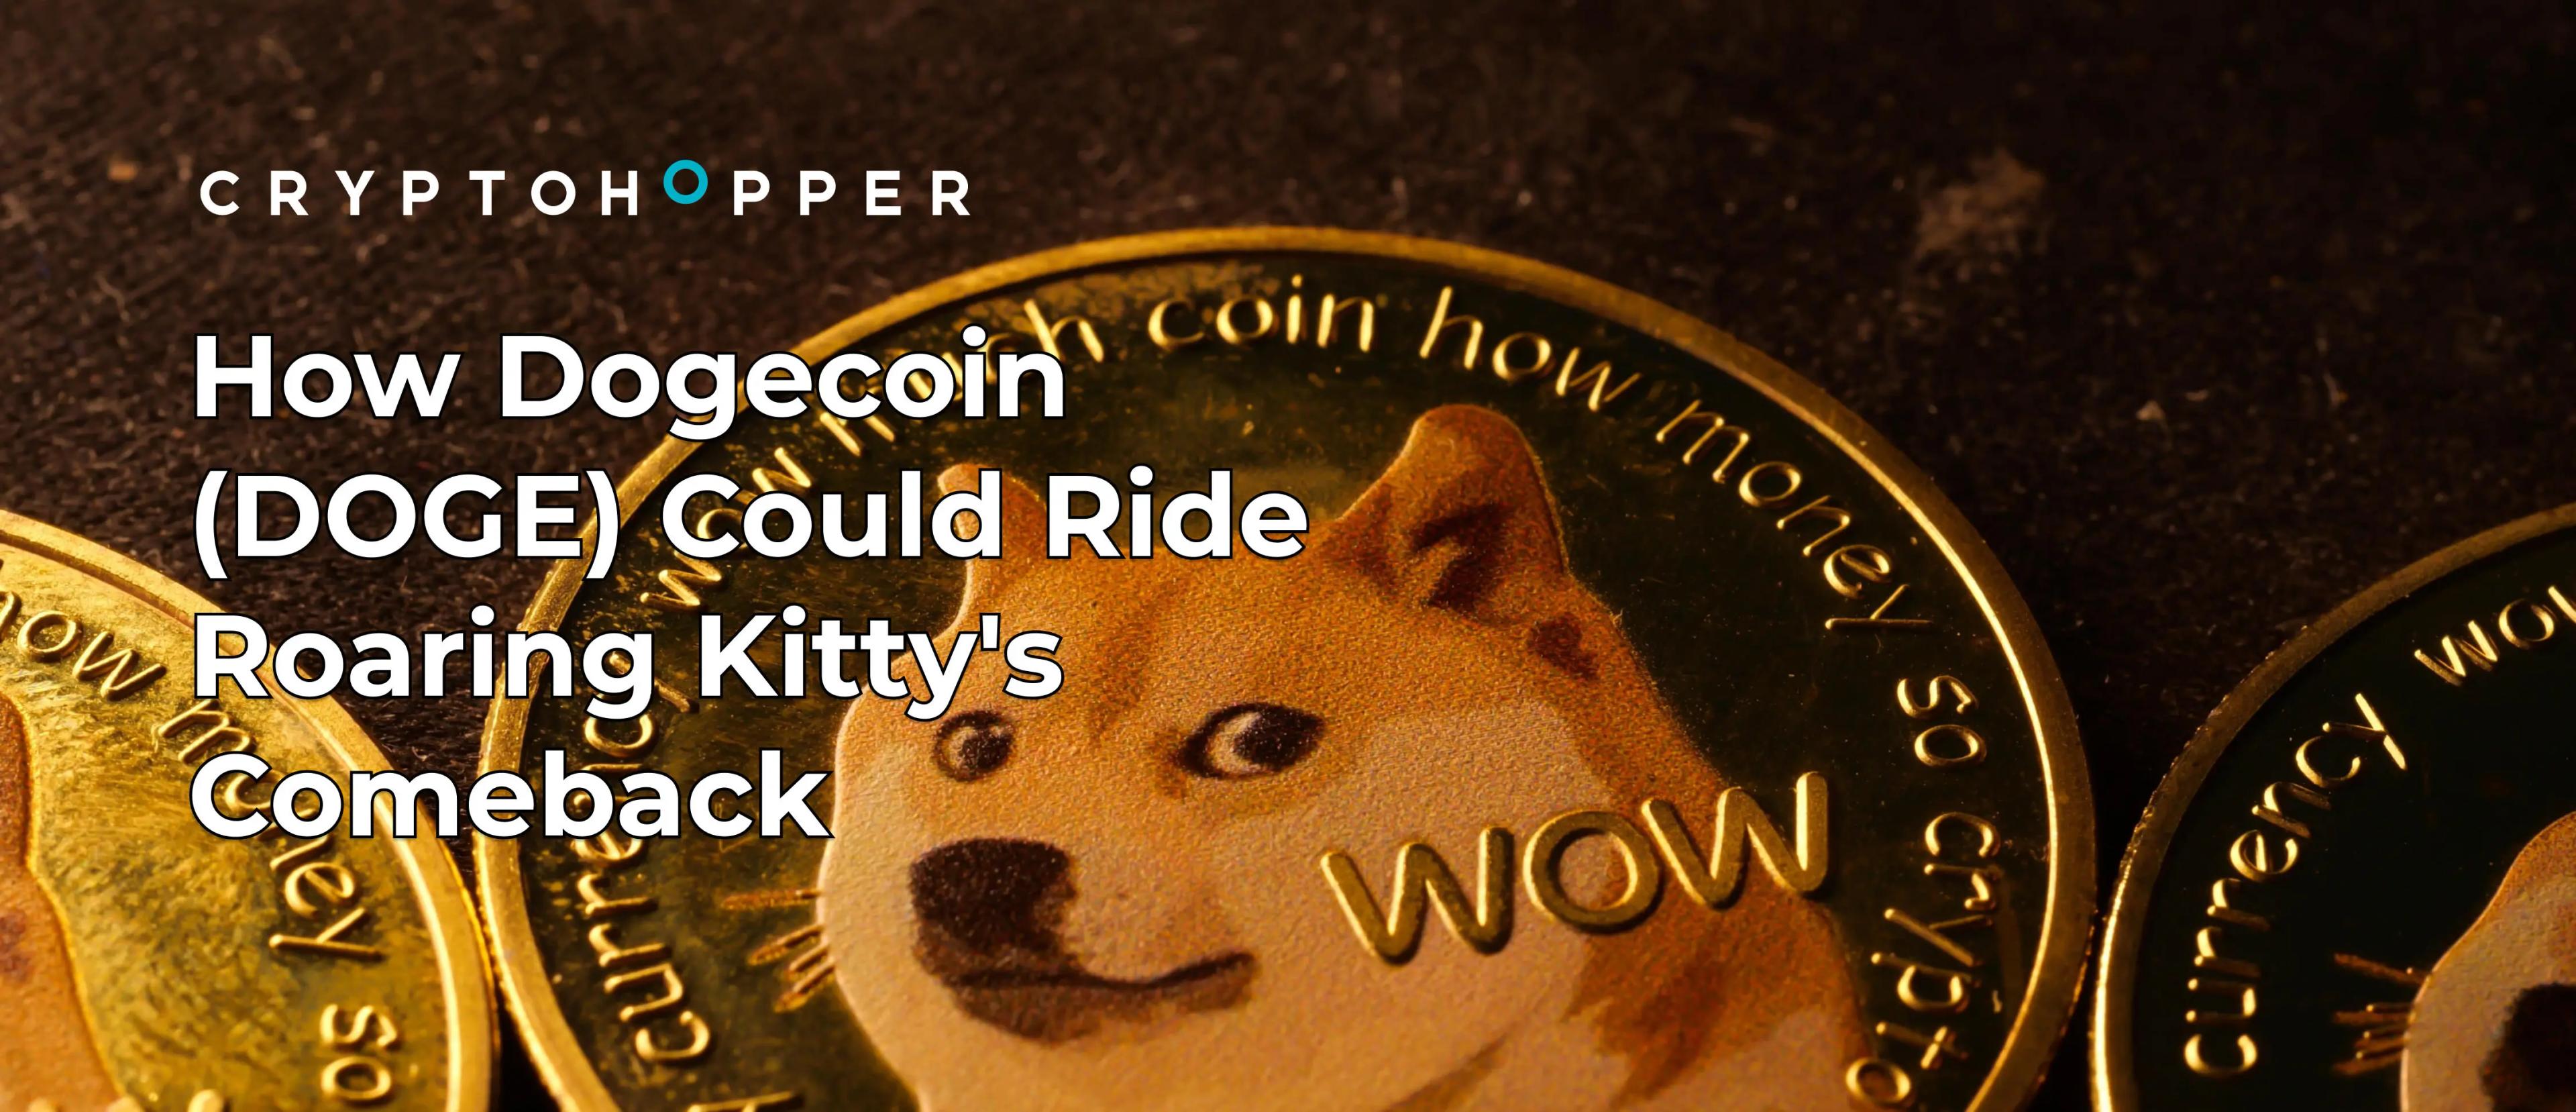 How Dogecoin (DOGE) Could Ride Roaring Kitty's Comeback